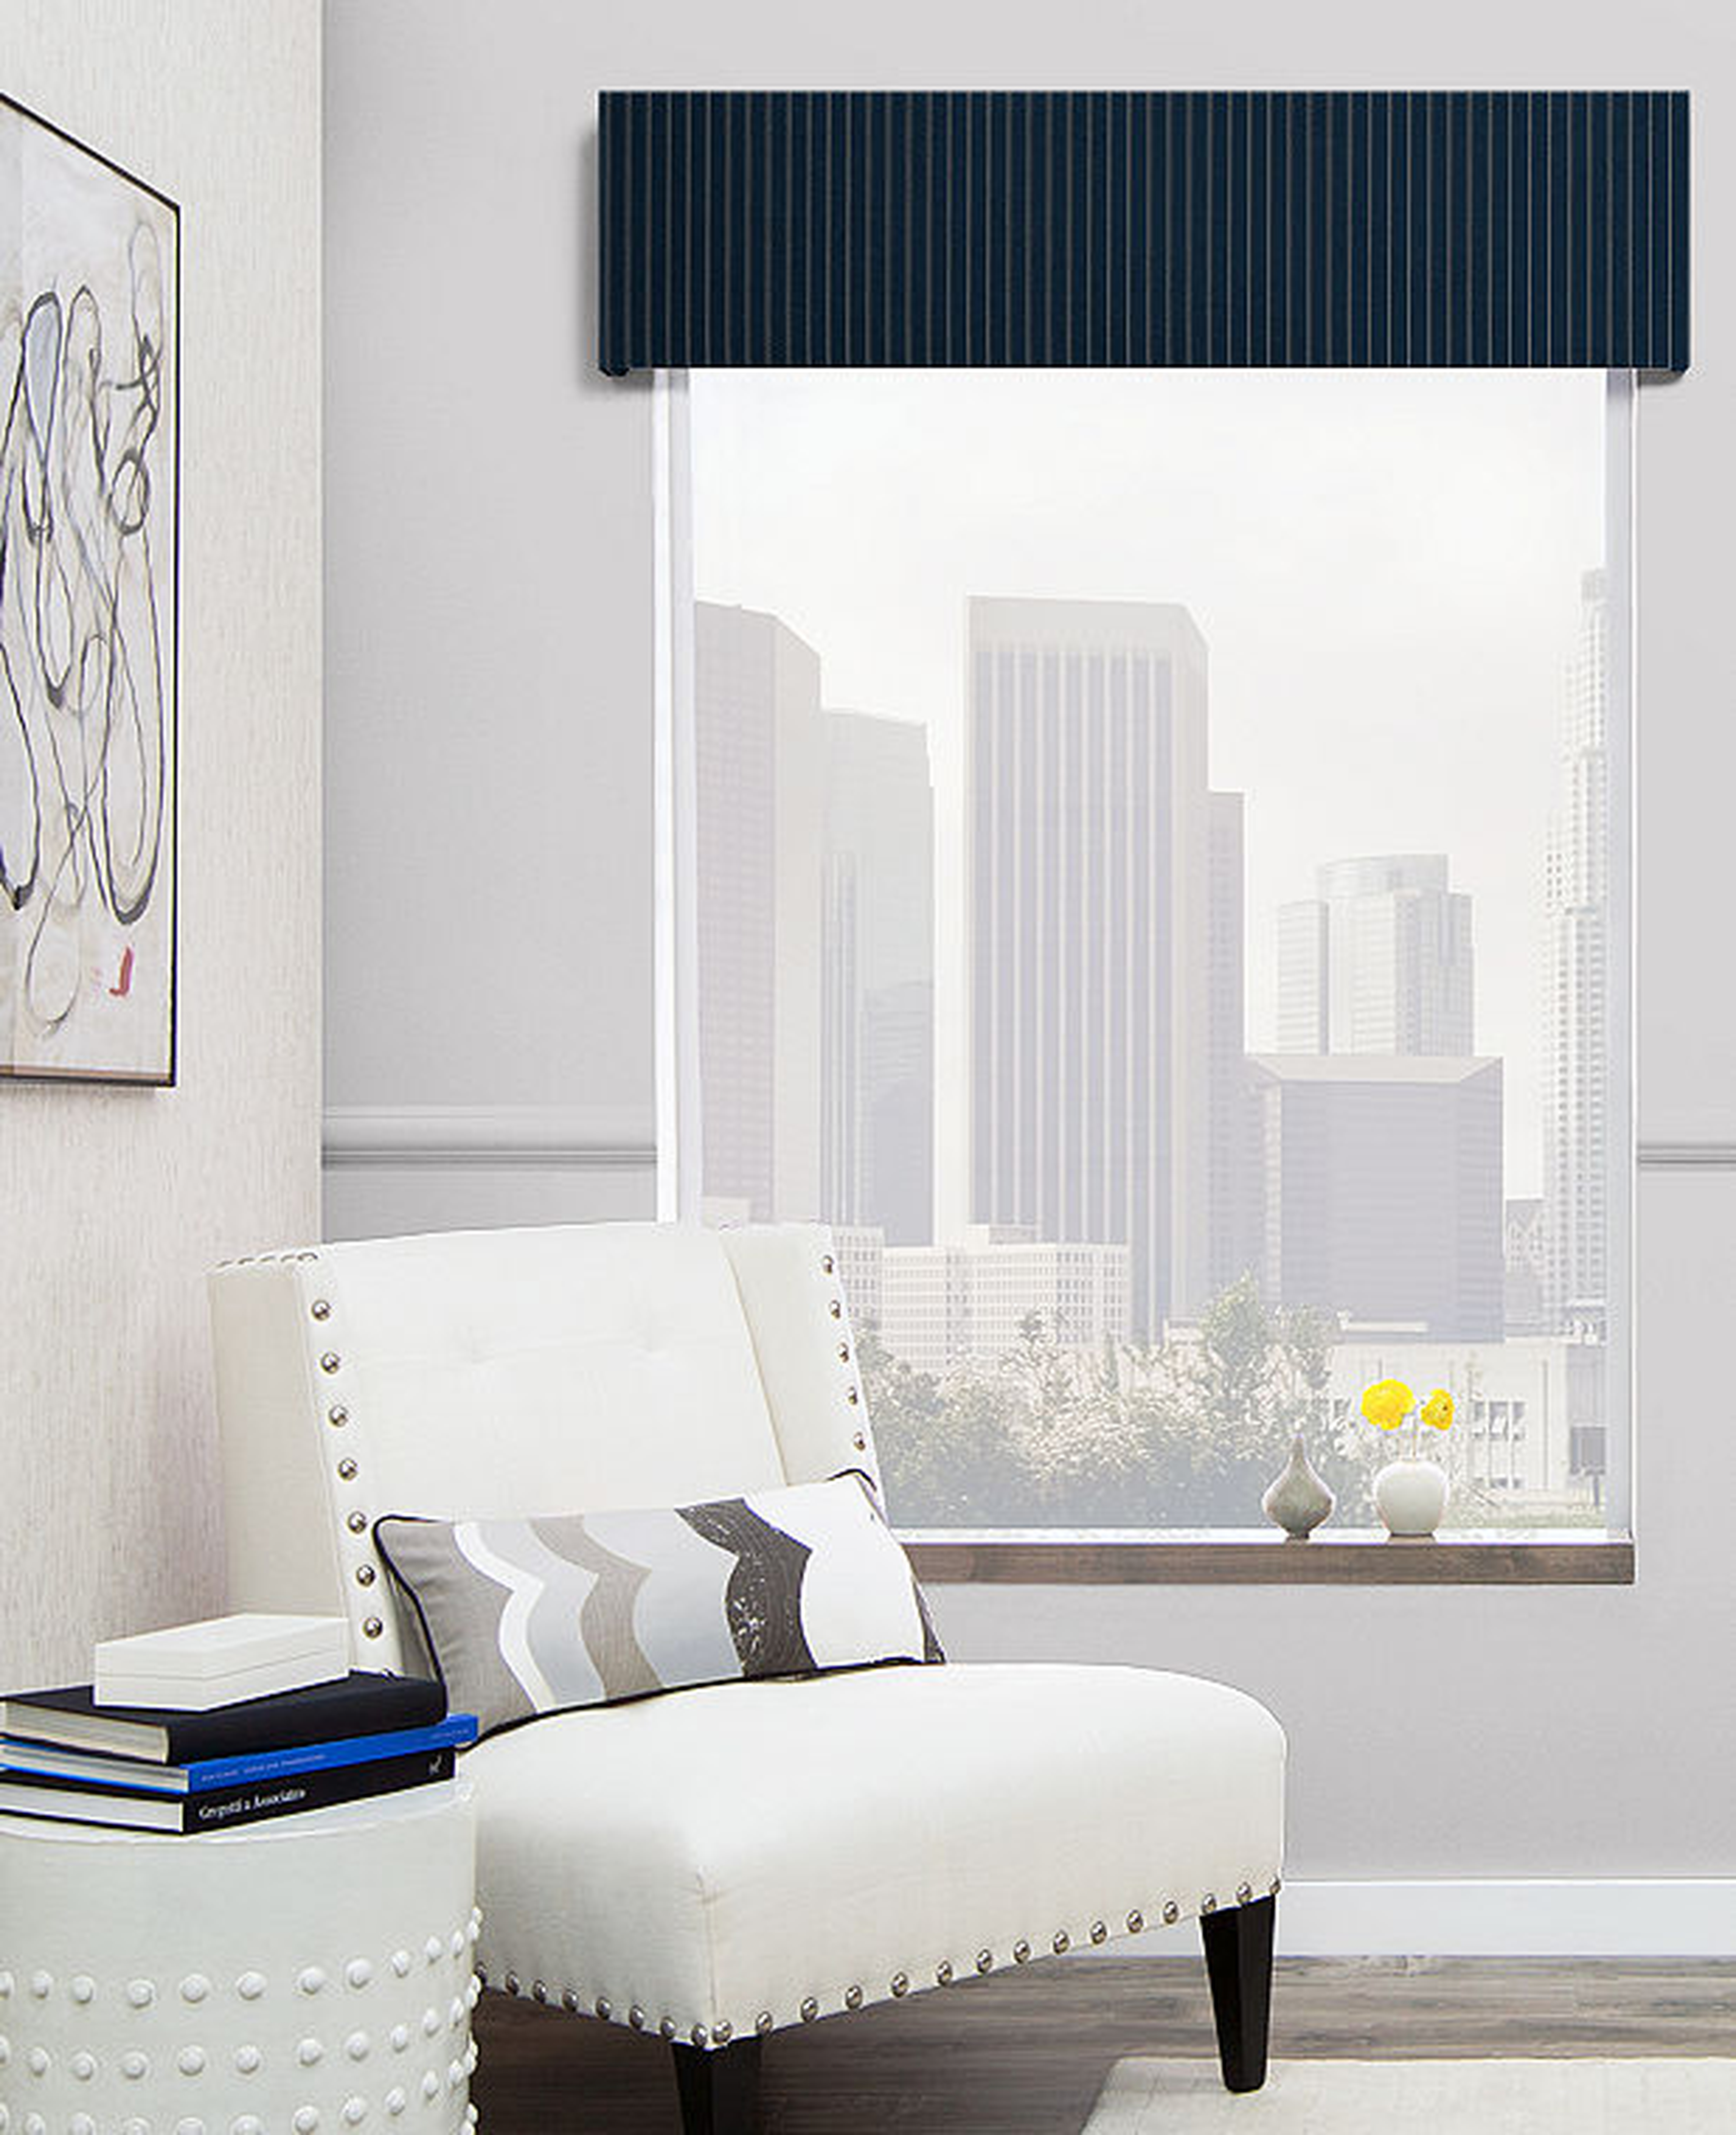 CORNICE VALANCE Black with white stripes - The Shade Store